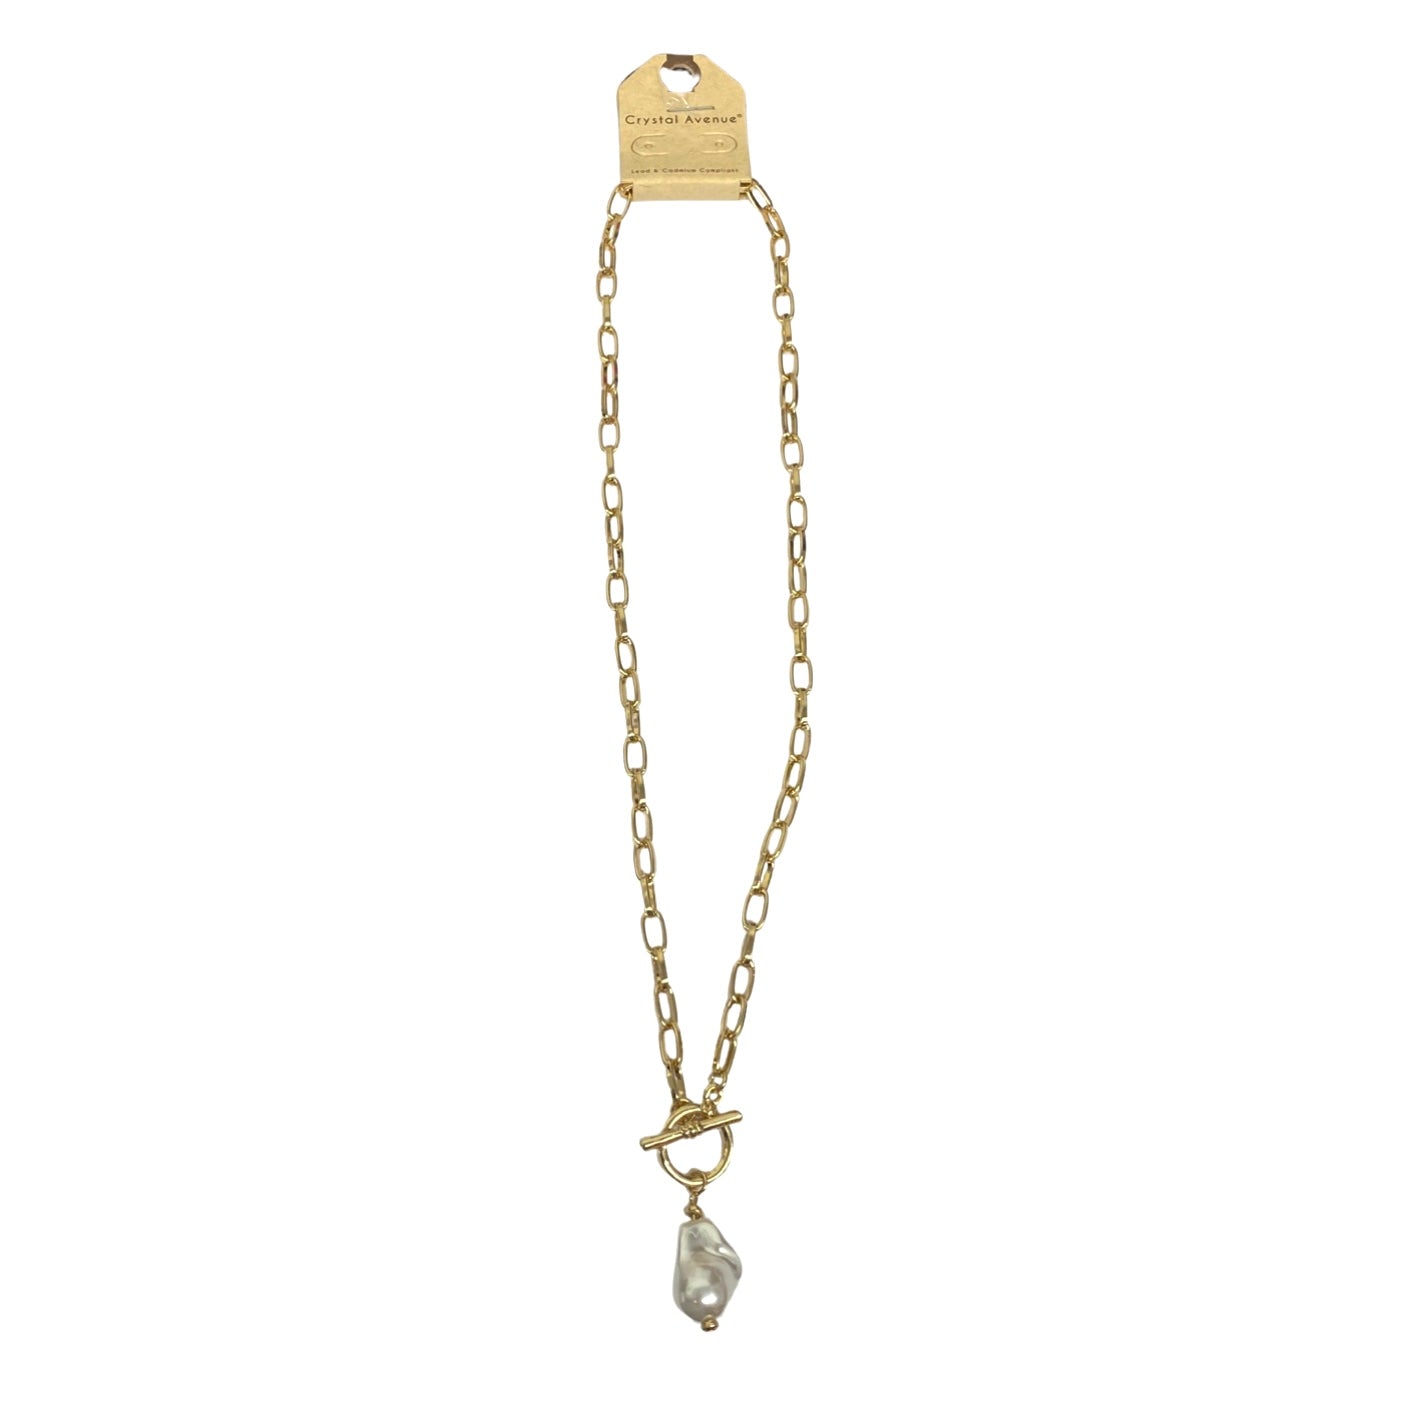 Crystal Avenue Chain And Pearl Pendant Necklace